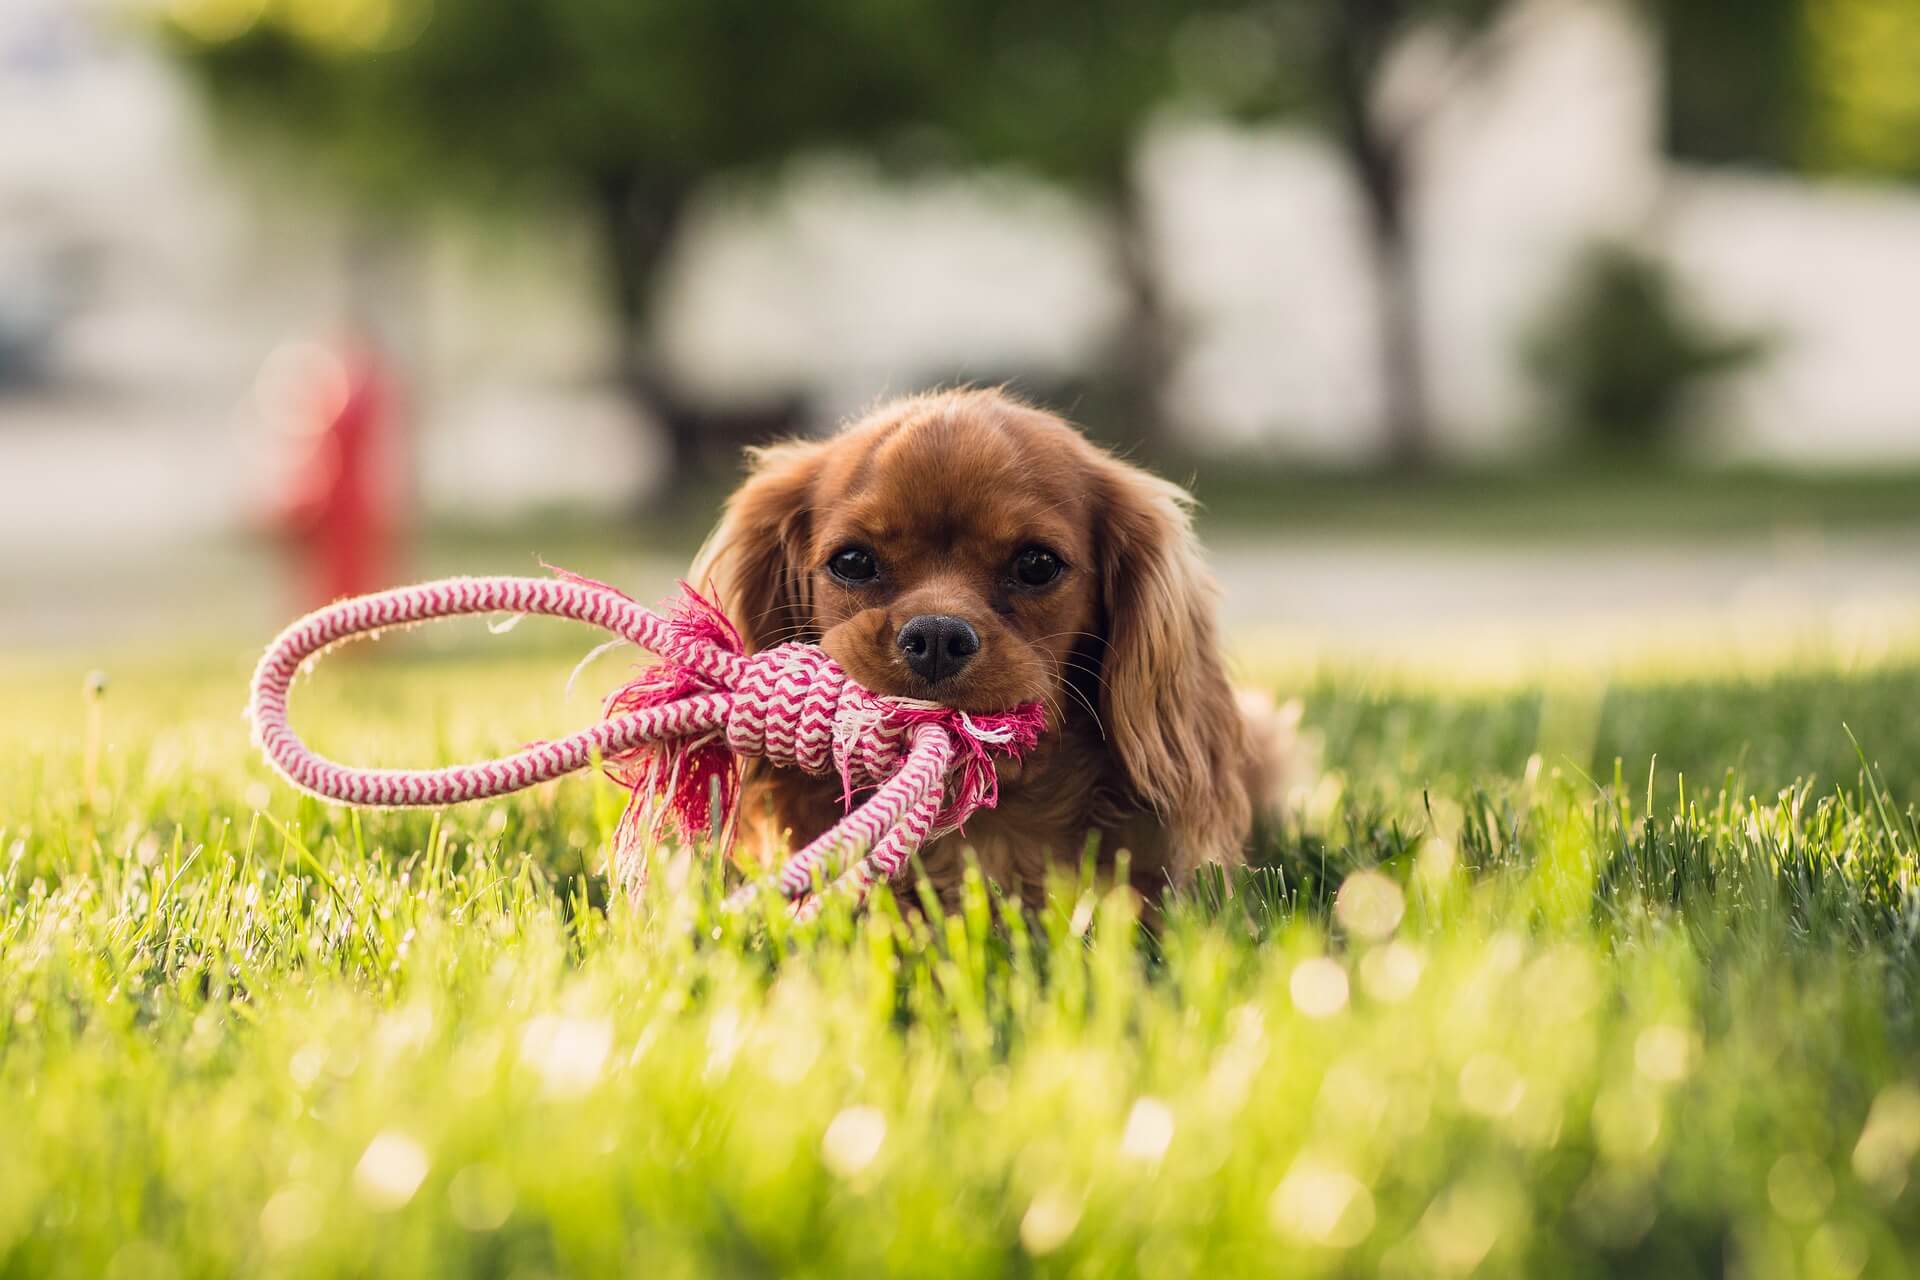 How to Keep Your Pet Safe and Sound During Yard Work